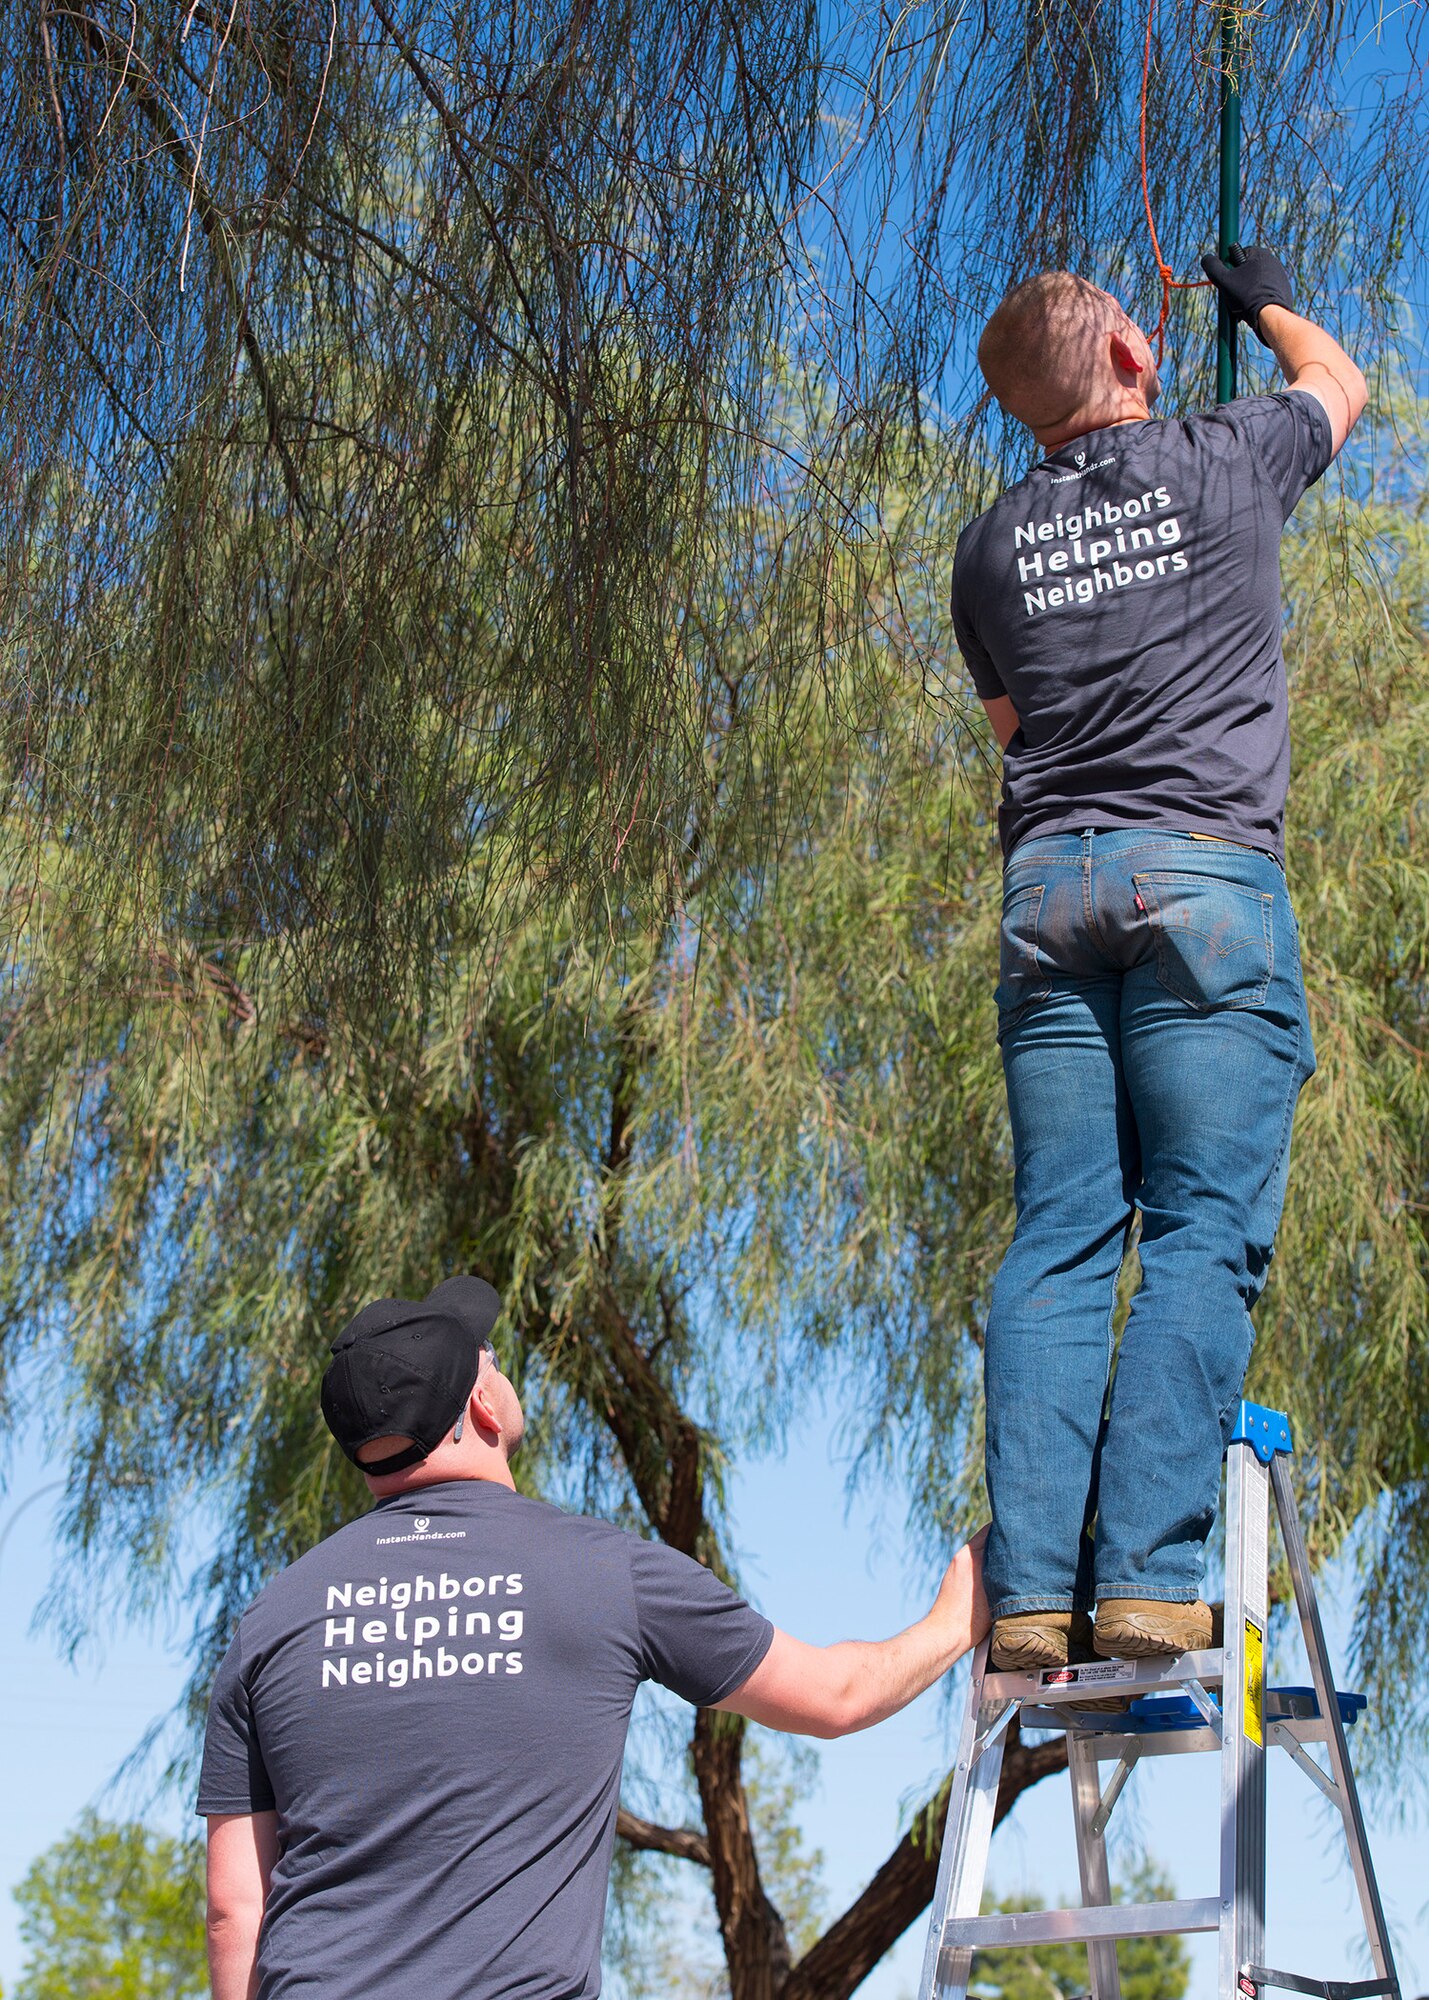 Airman 1st Class Bradley Chitwood, 56th Force Support Squadron food service journeyman (left), and Senior Airman Montana McCormick, 56th Force Support Squadron lead recreational specialist, trim a tree April 1, 2020, in Avondale, Ariz.